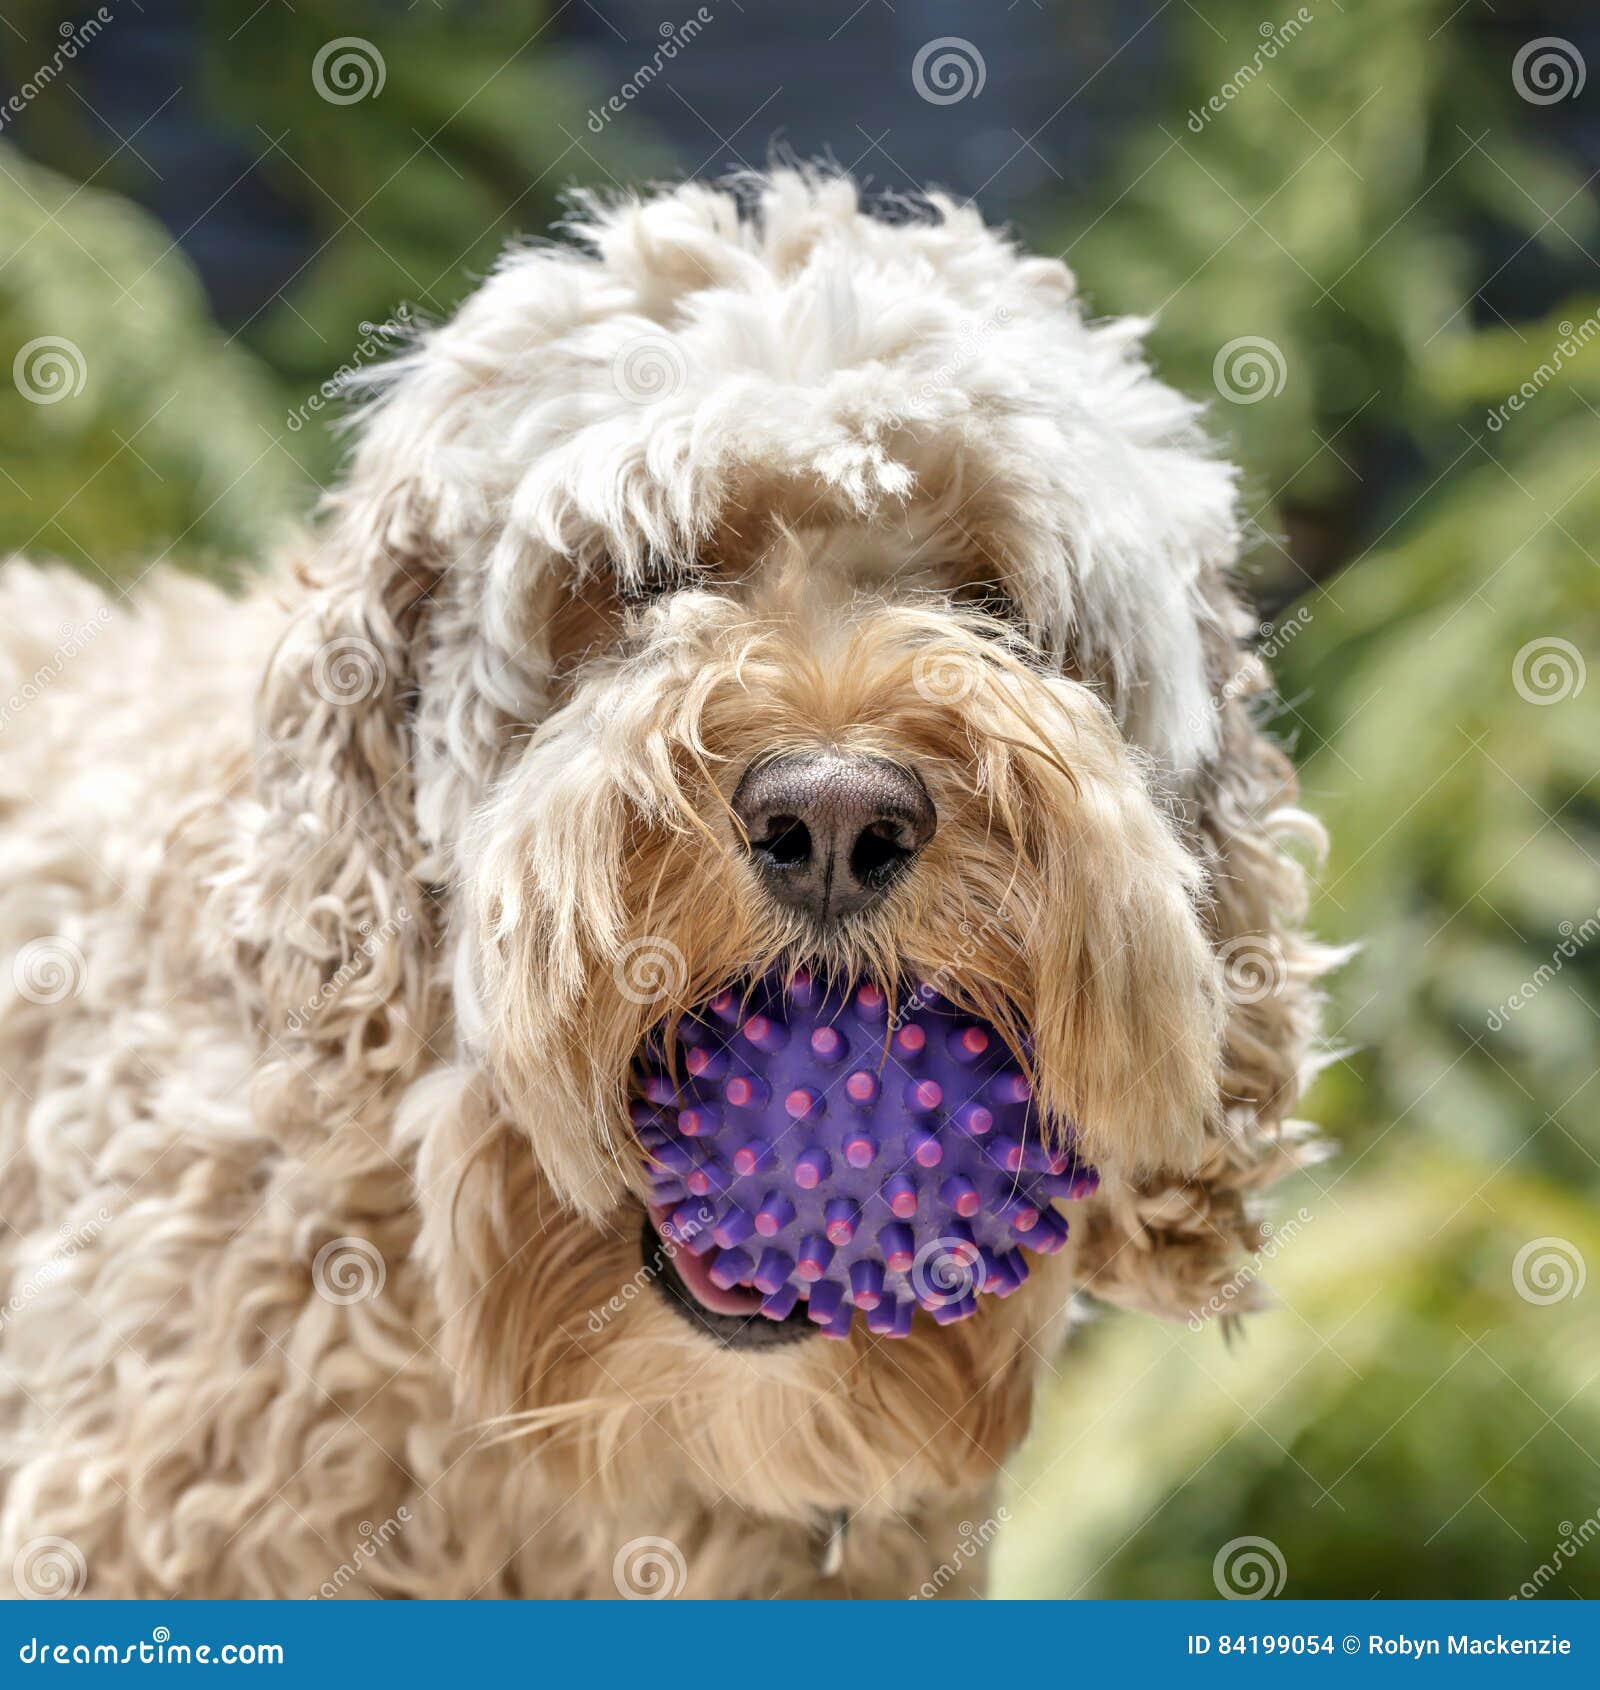 shaggy cockapoo dog with ball portrait with blurred background